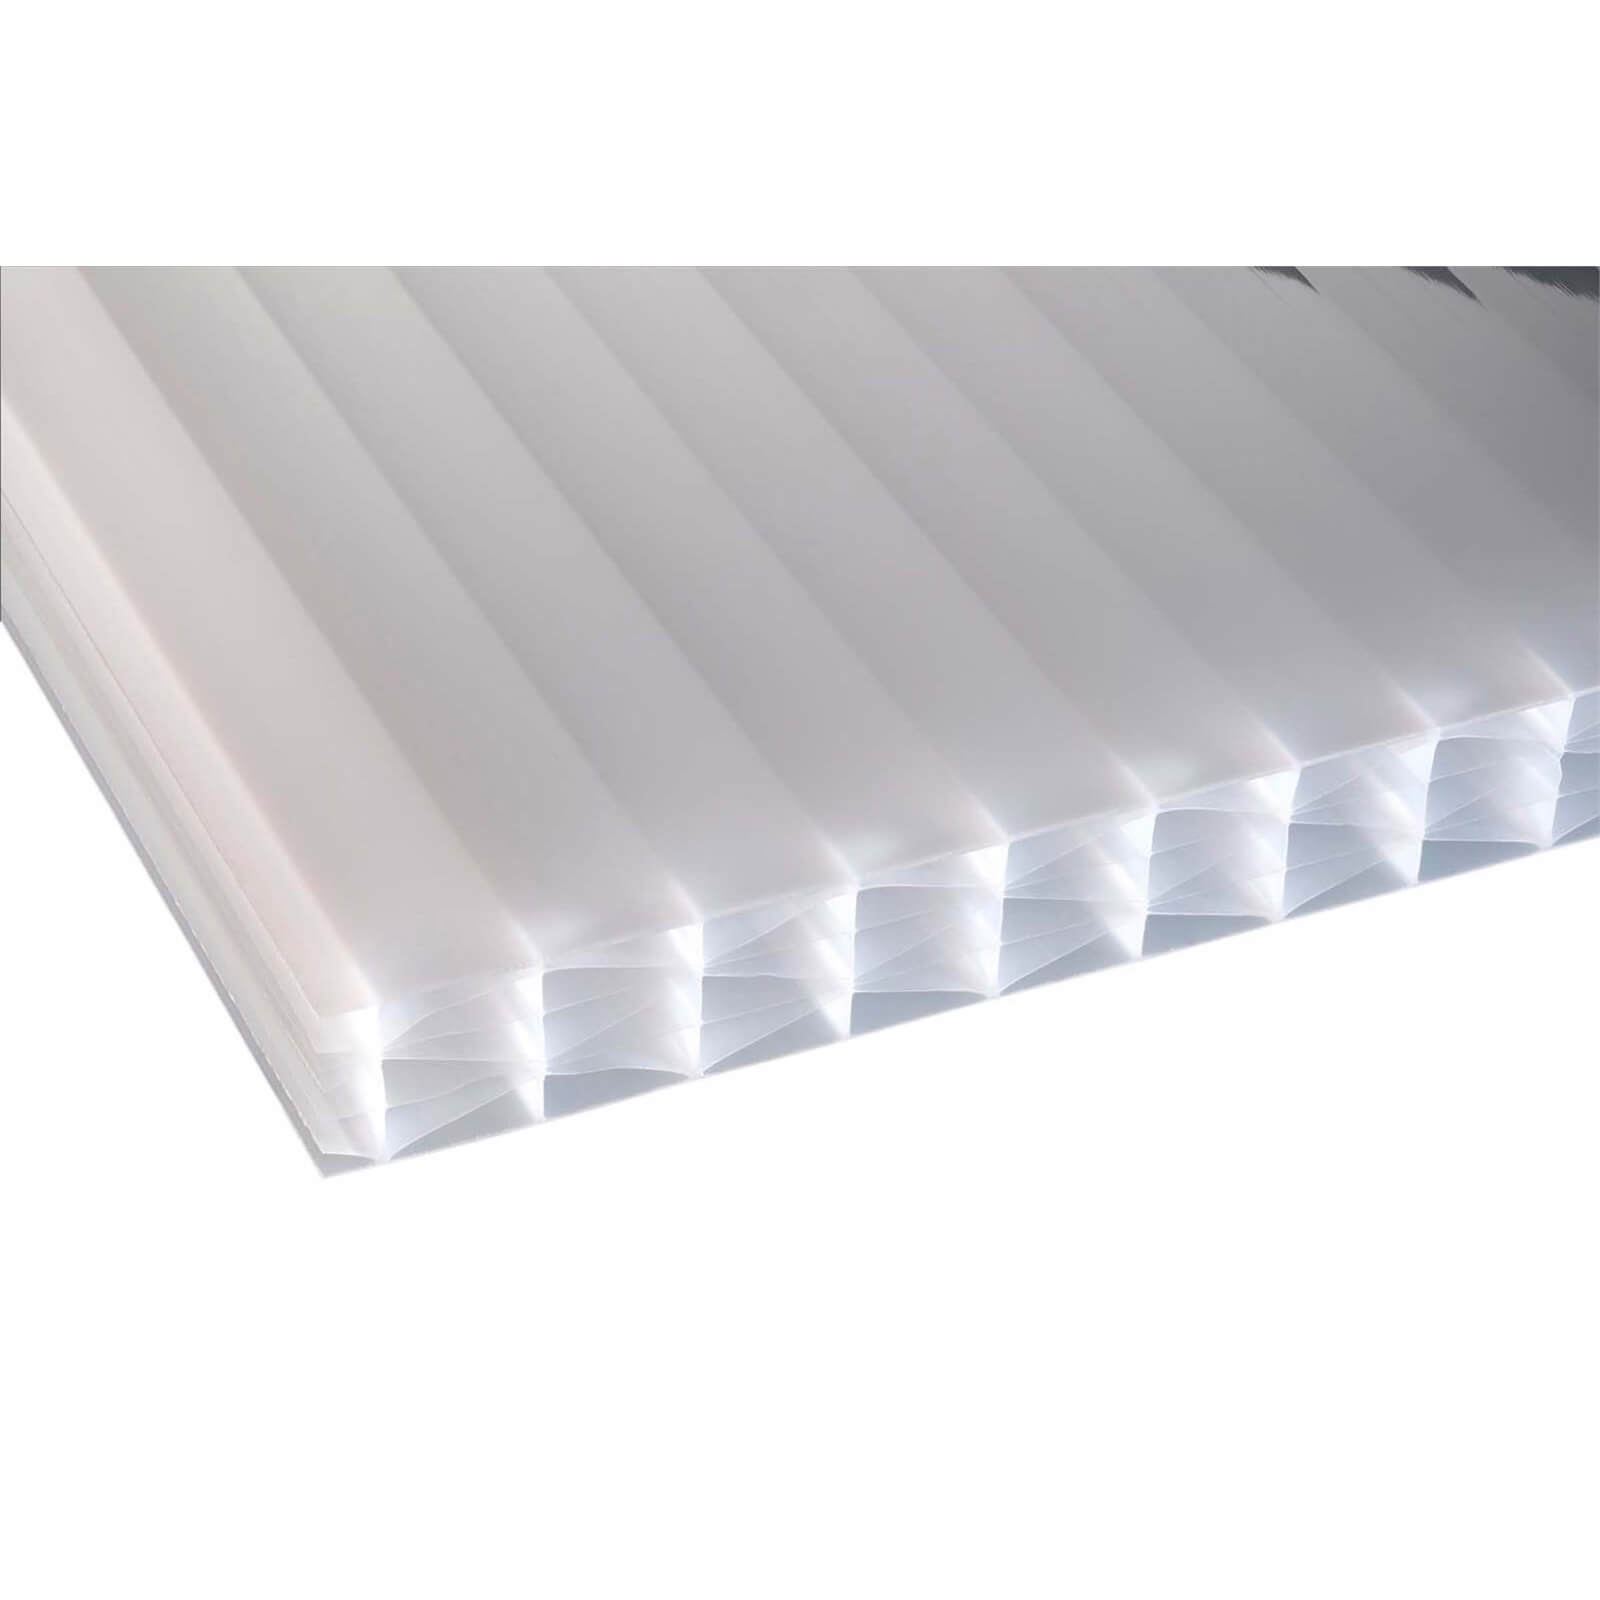 Photo of Corotherm Opal Roof Sheet 4000x980x25mm - Pack 5